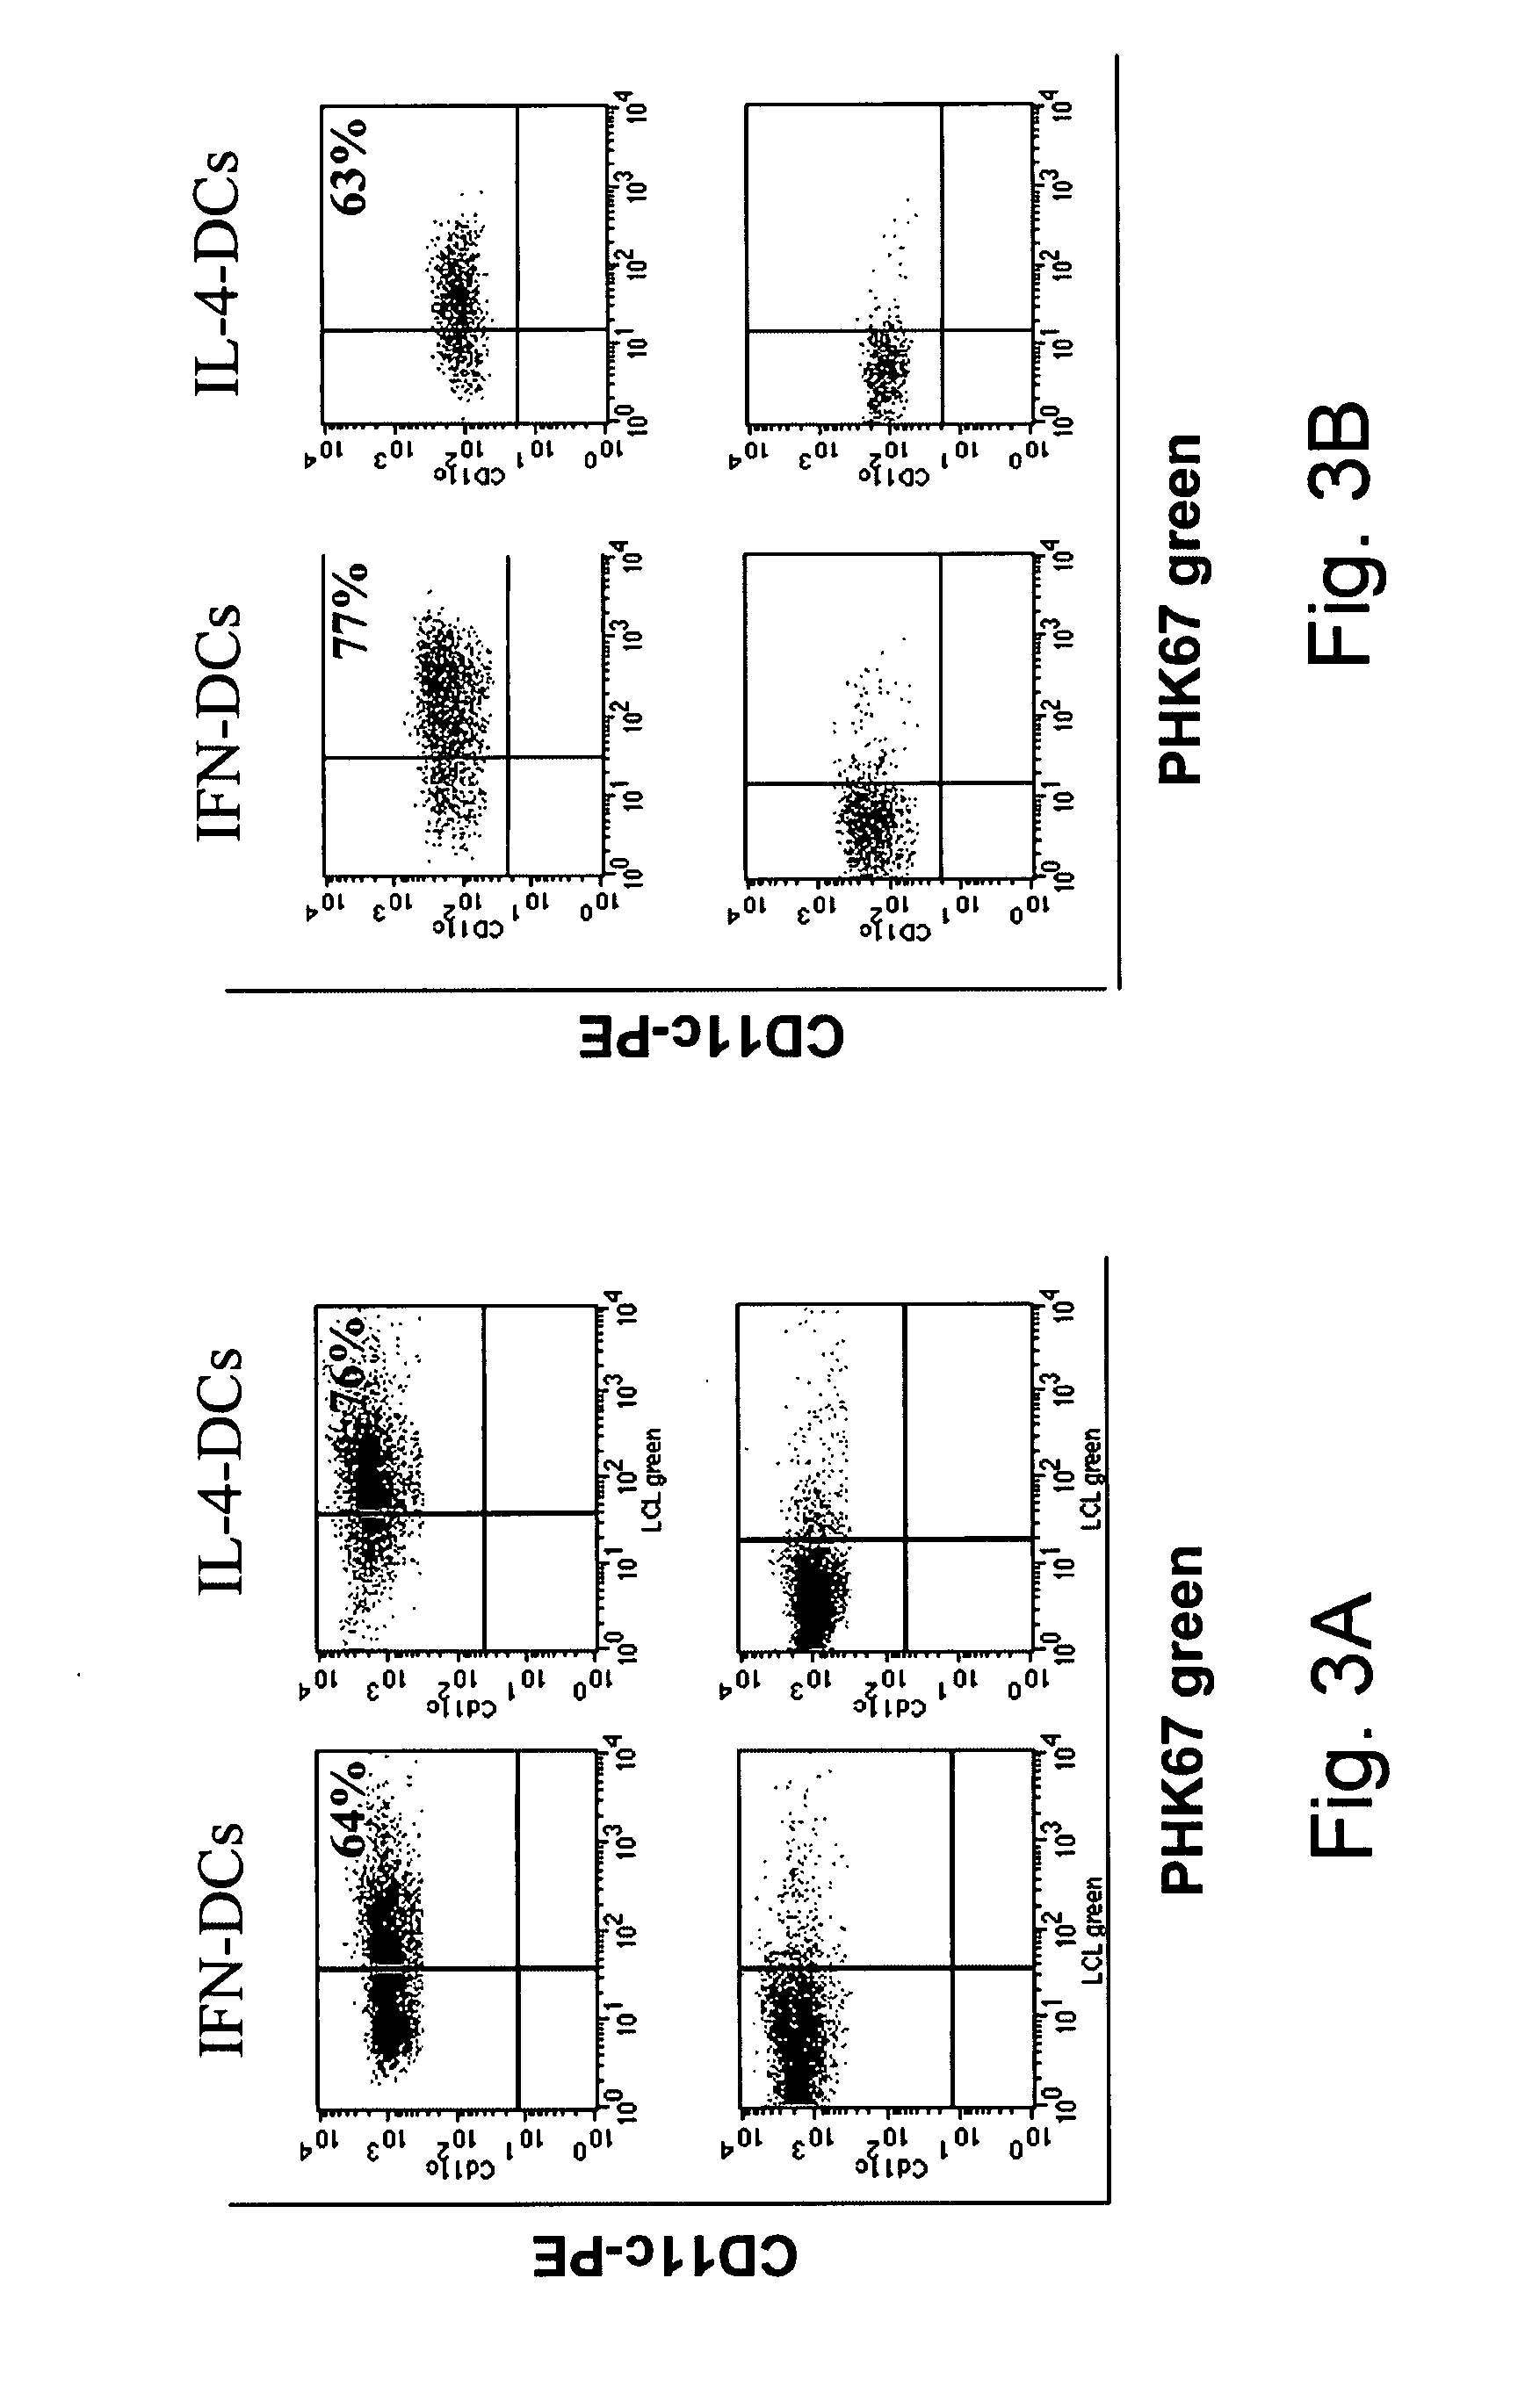 Dendritic cells, uses therefor, and vaccines and methods comprising the same